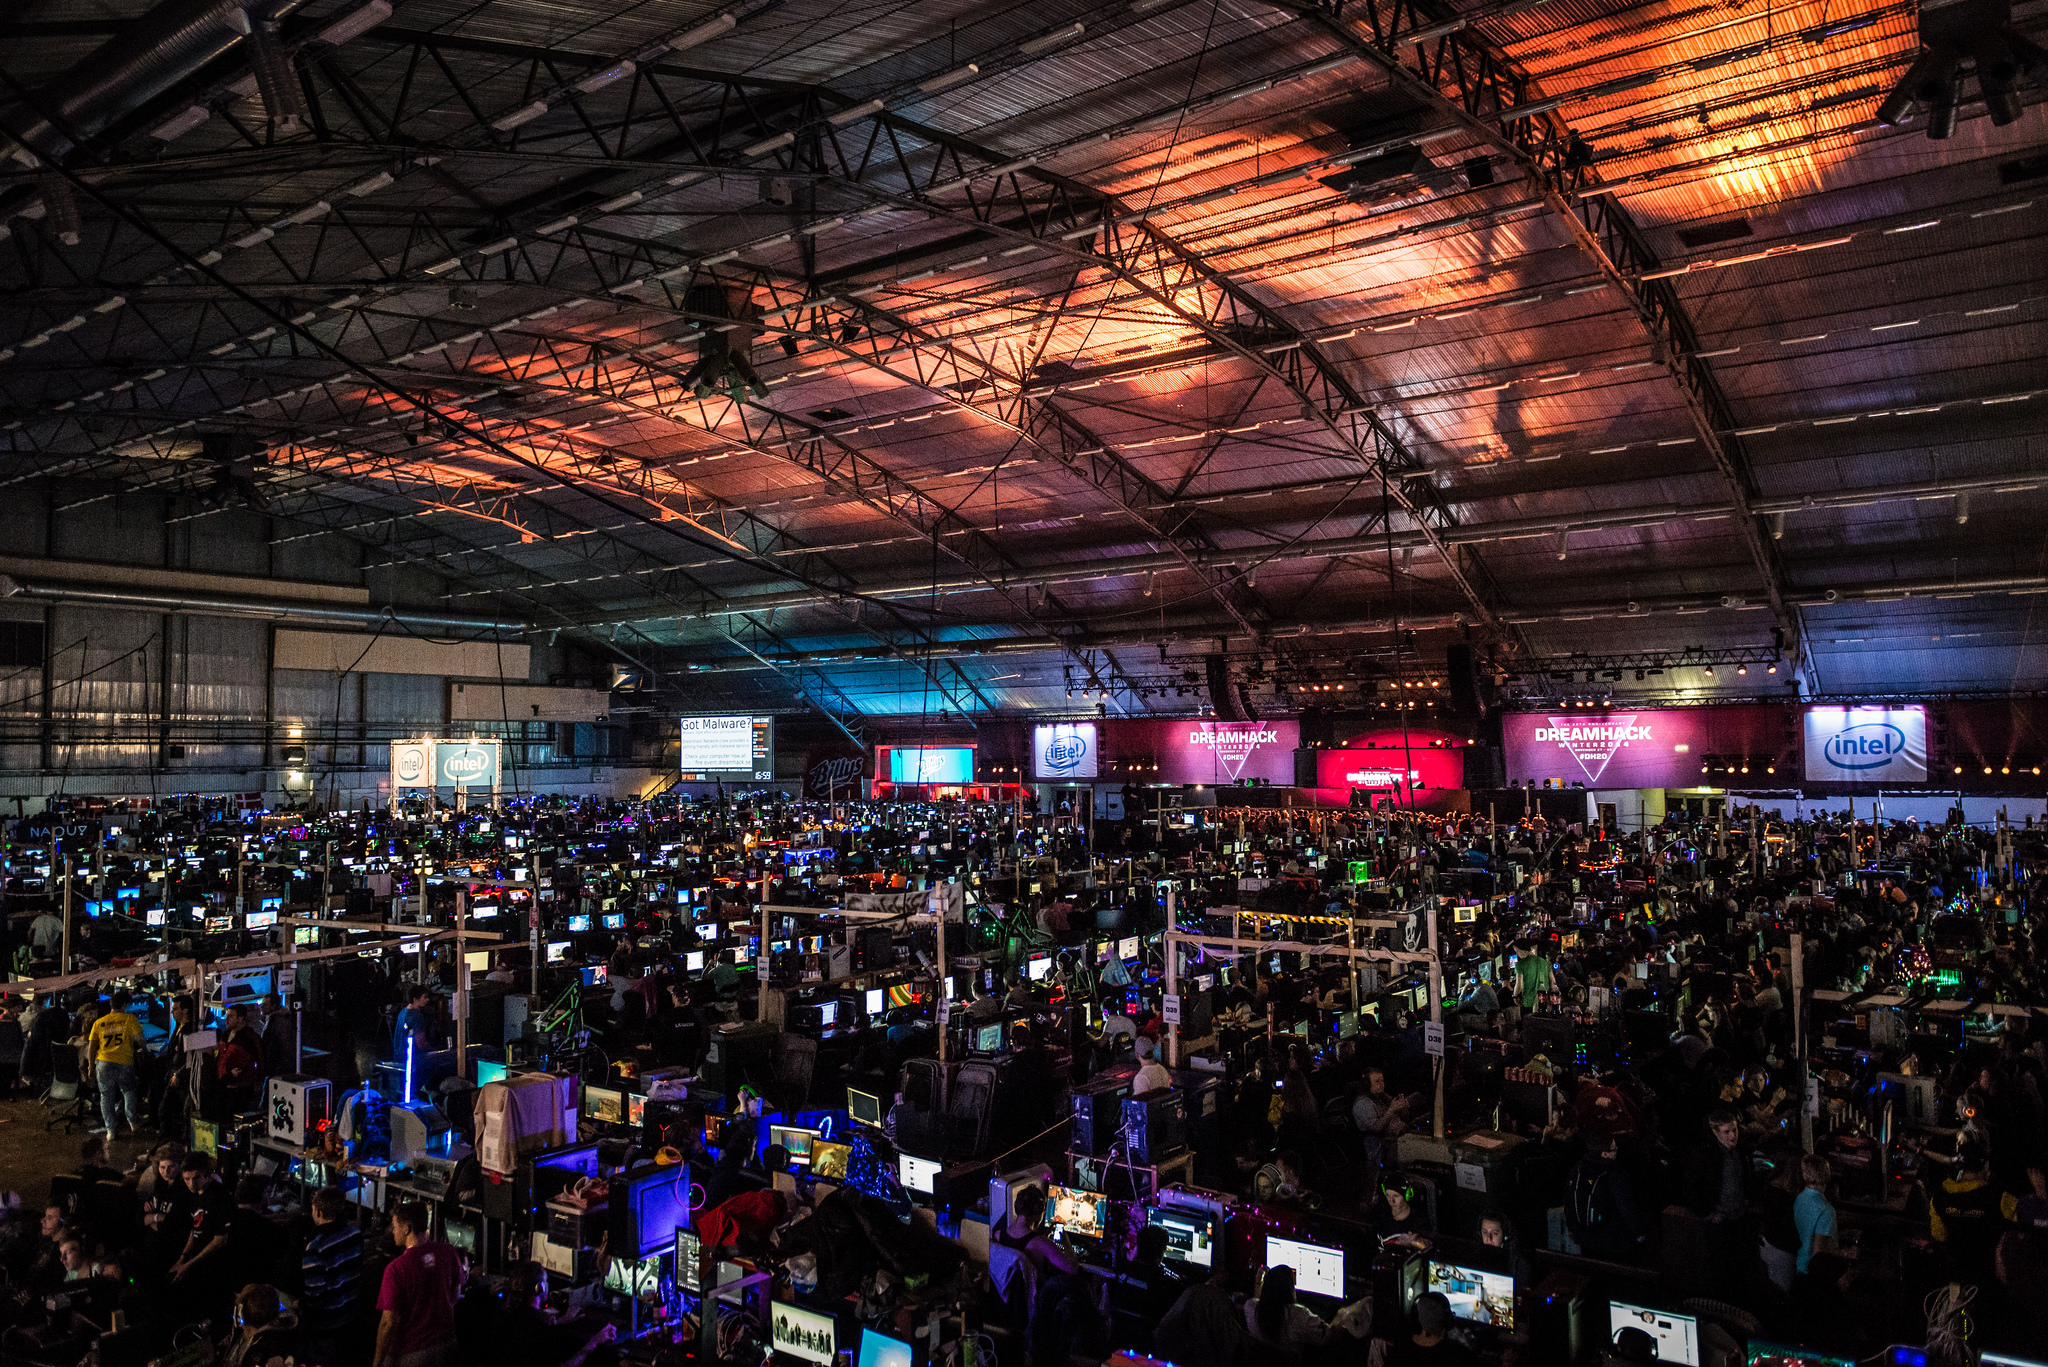 World’s Biggest LAN Party Had Over 22,000 Computers, Looked Awesome